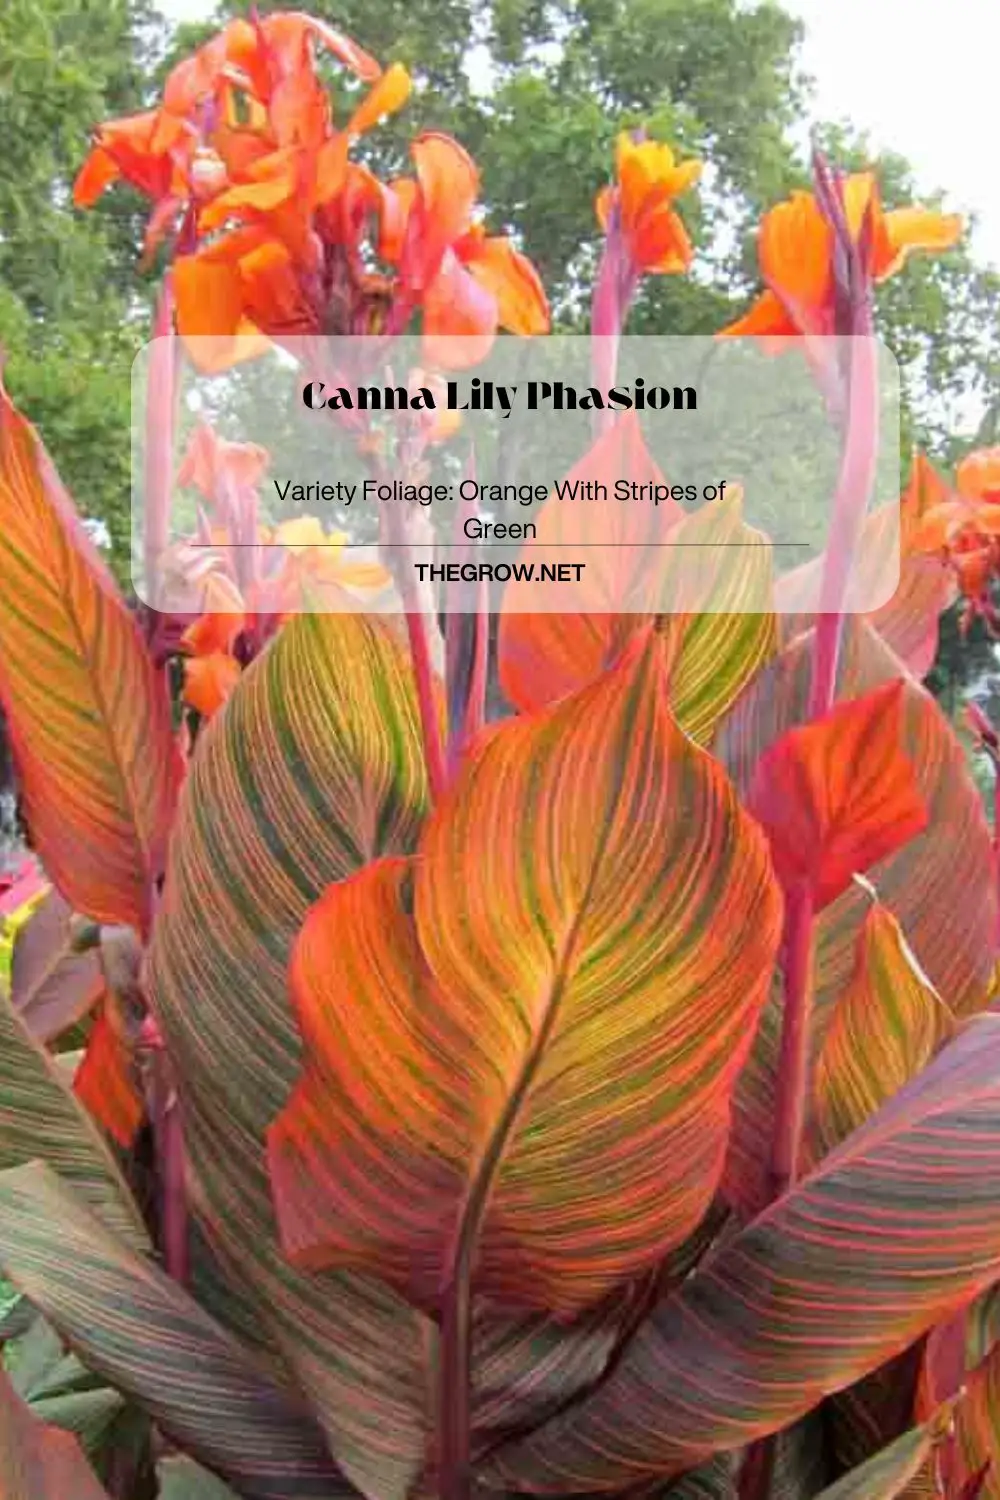 Canna Lily Phasion